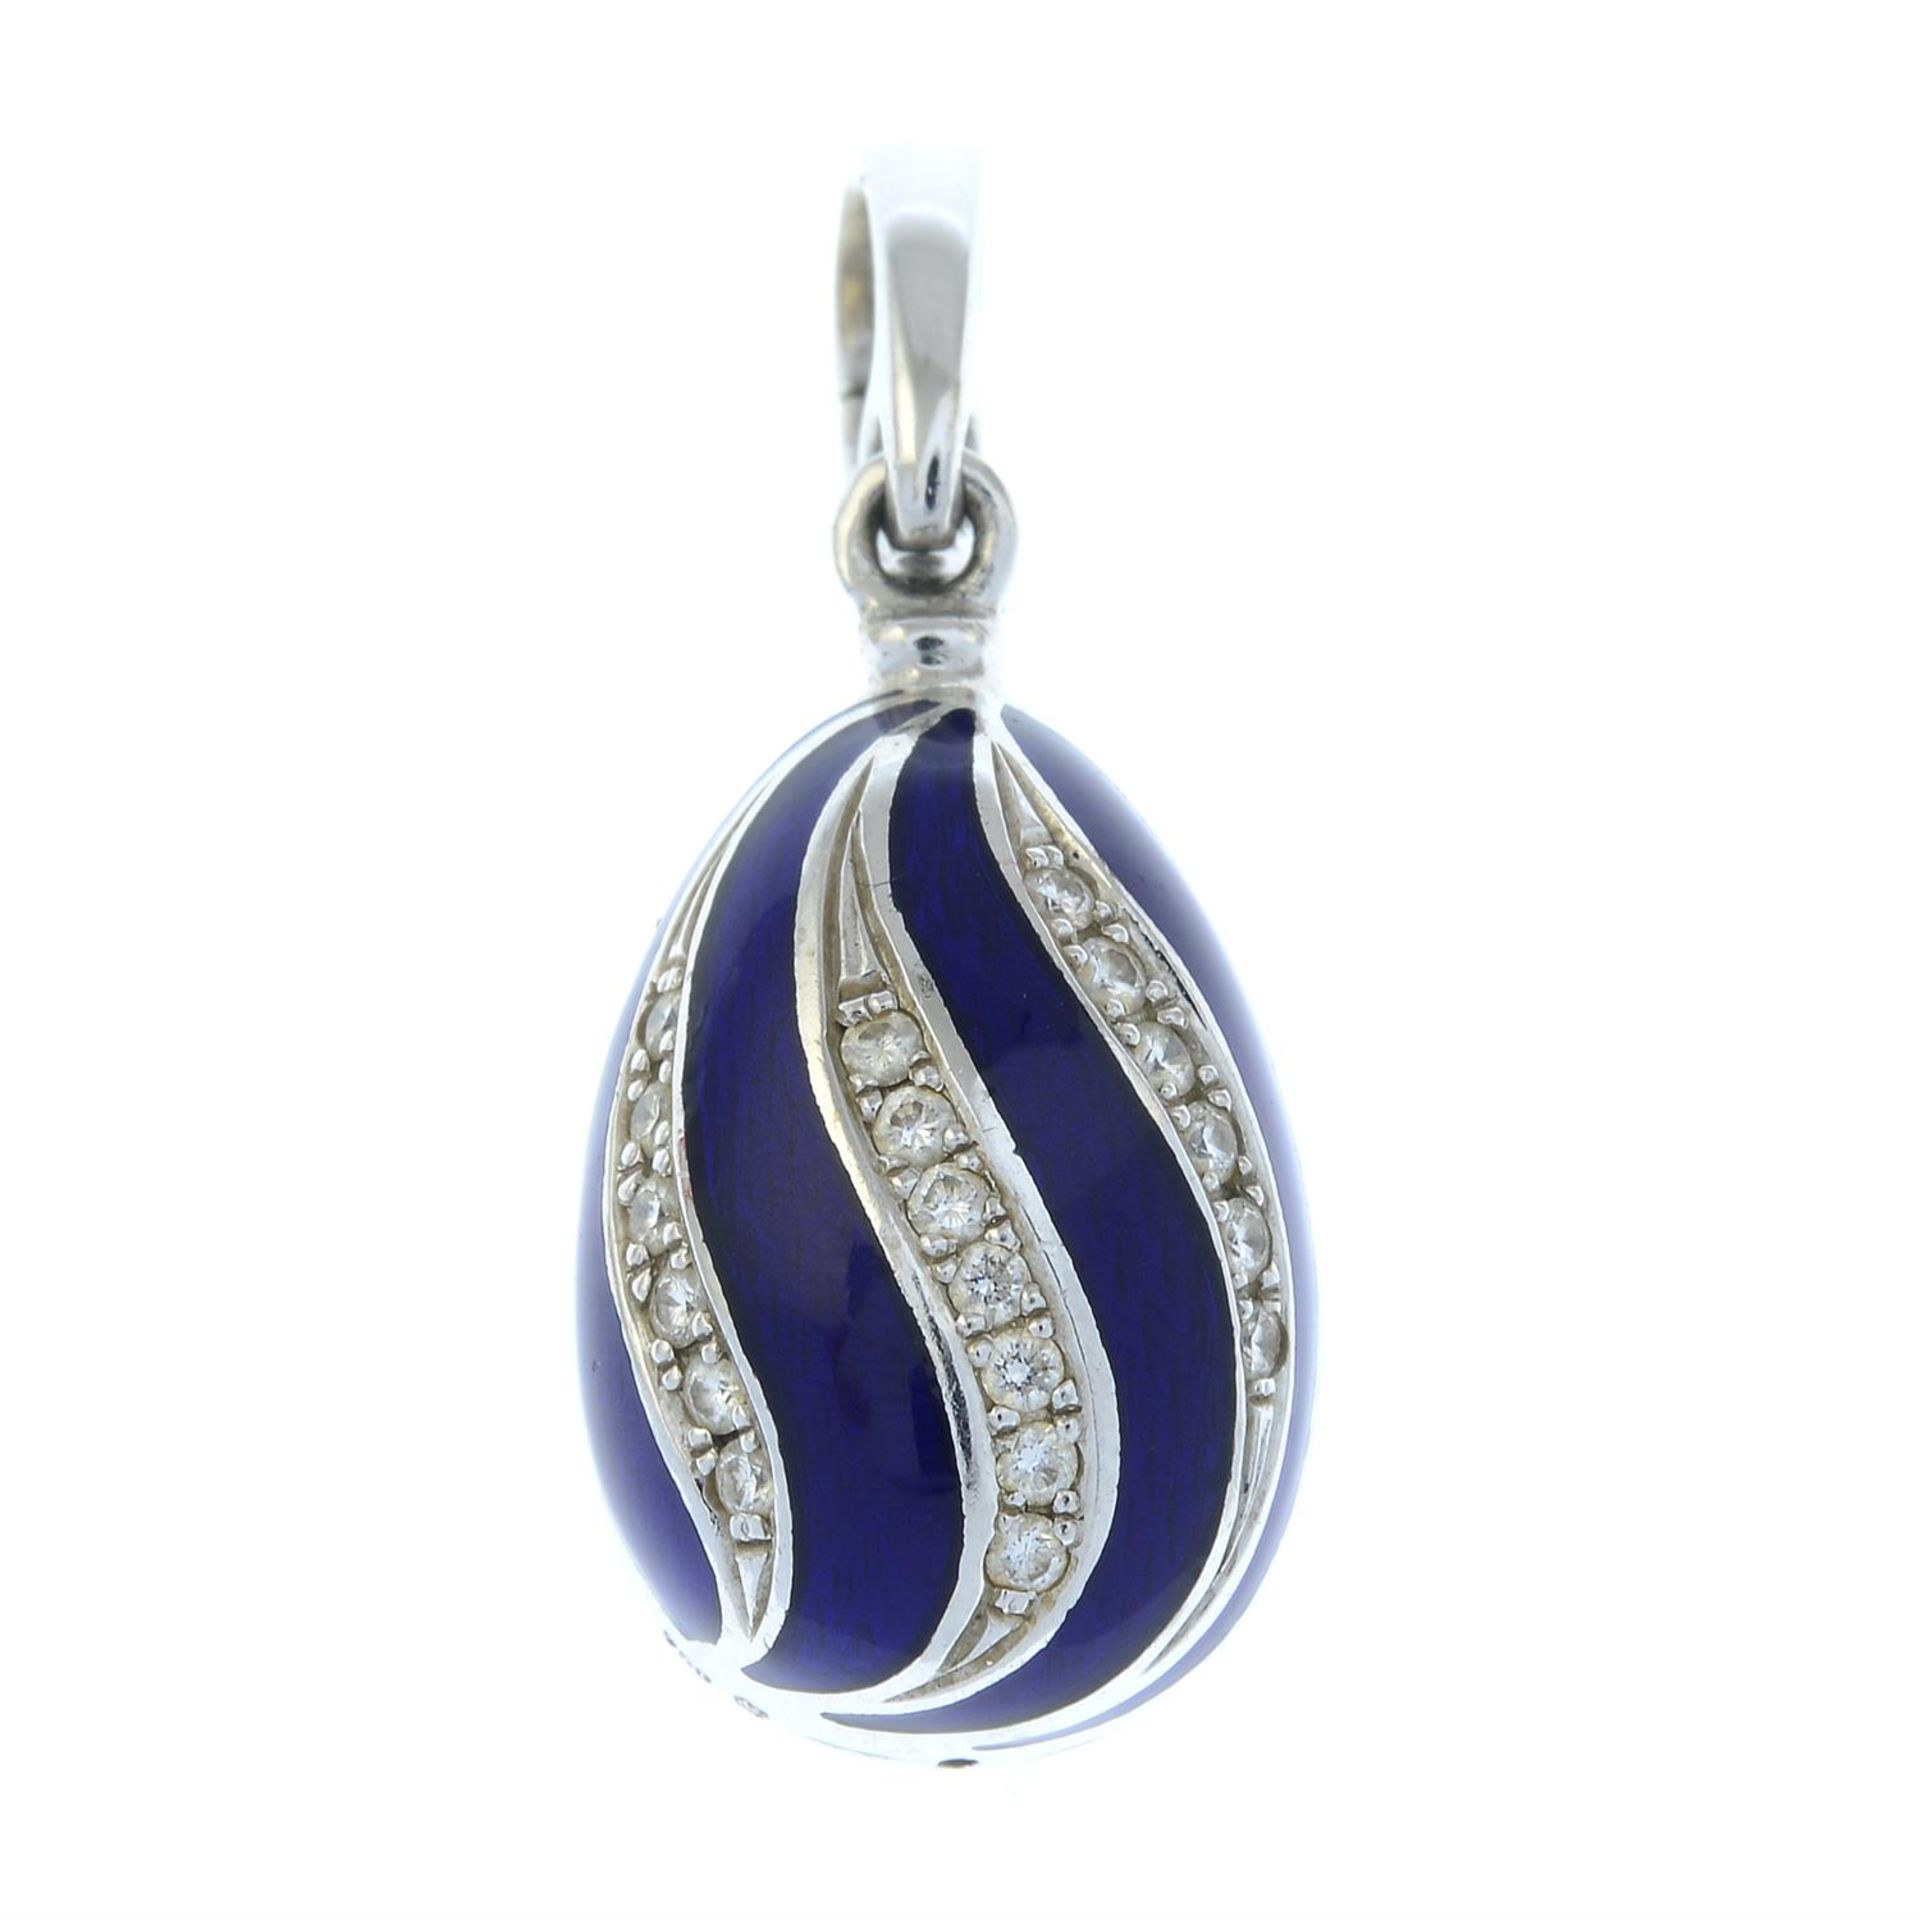 A limited edition 18ct gold brilliant-cut diamond and blue enamel egg pendant, by Fabergé. - Image 2 of 4